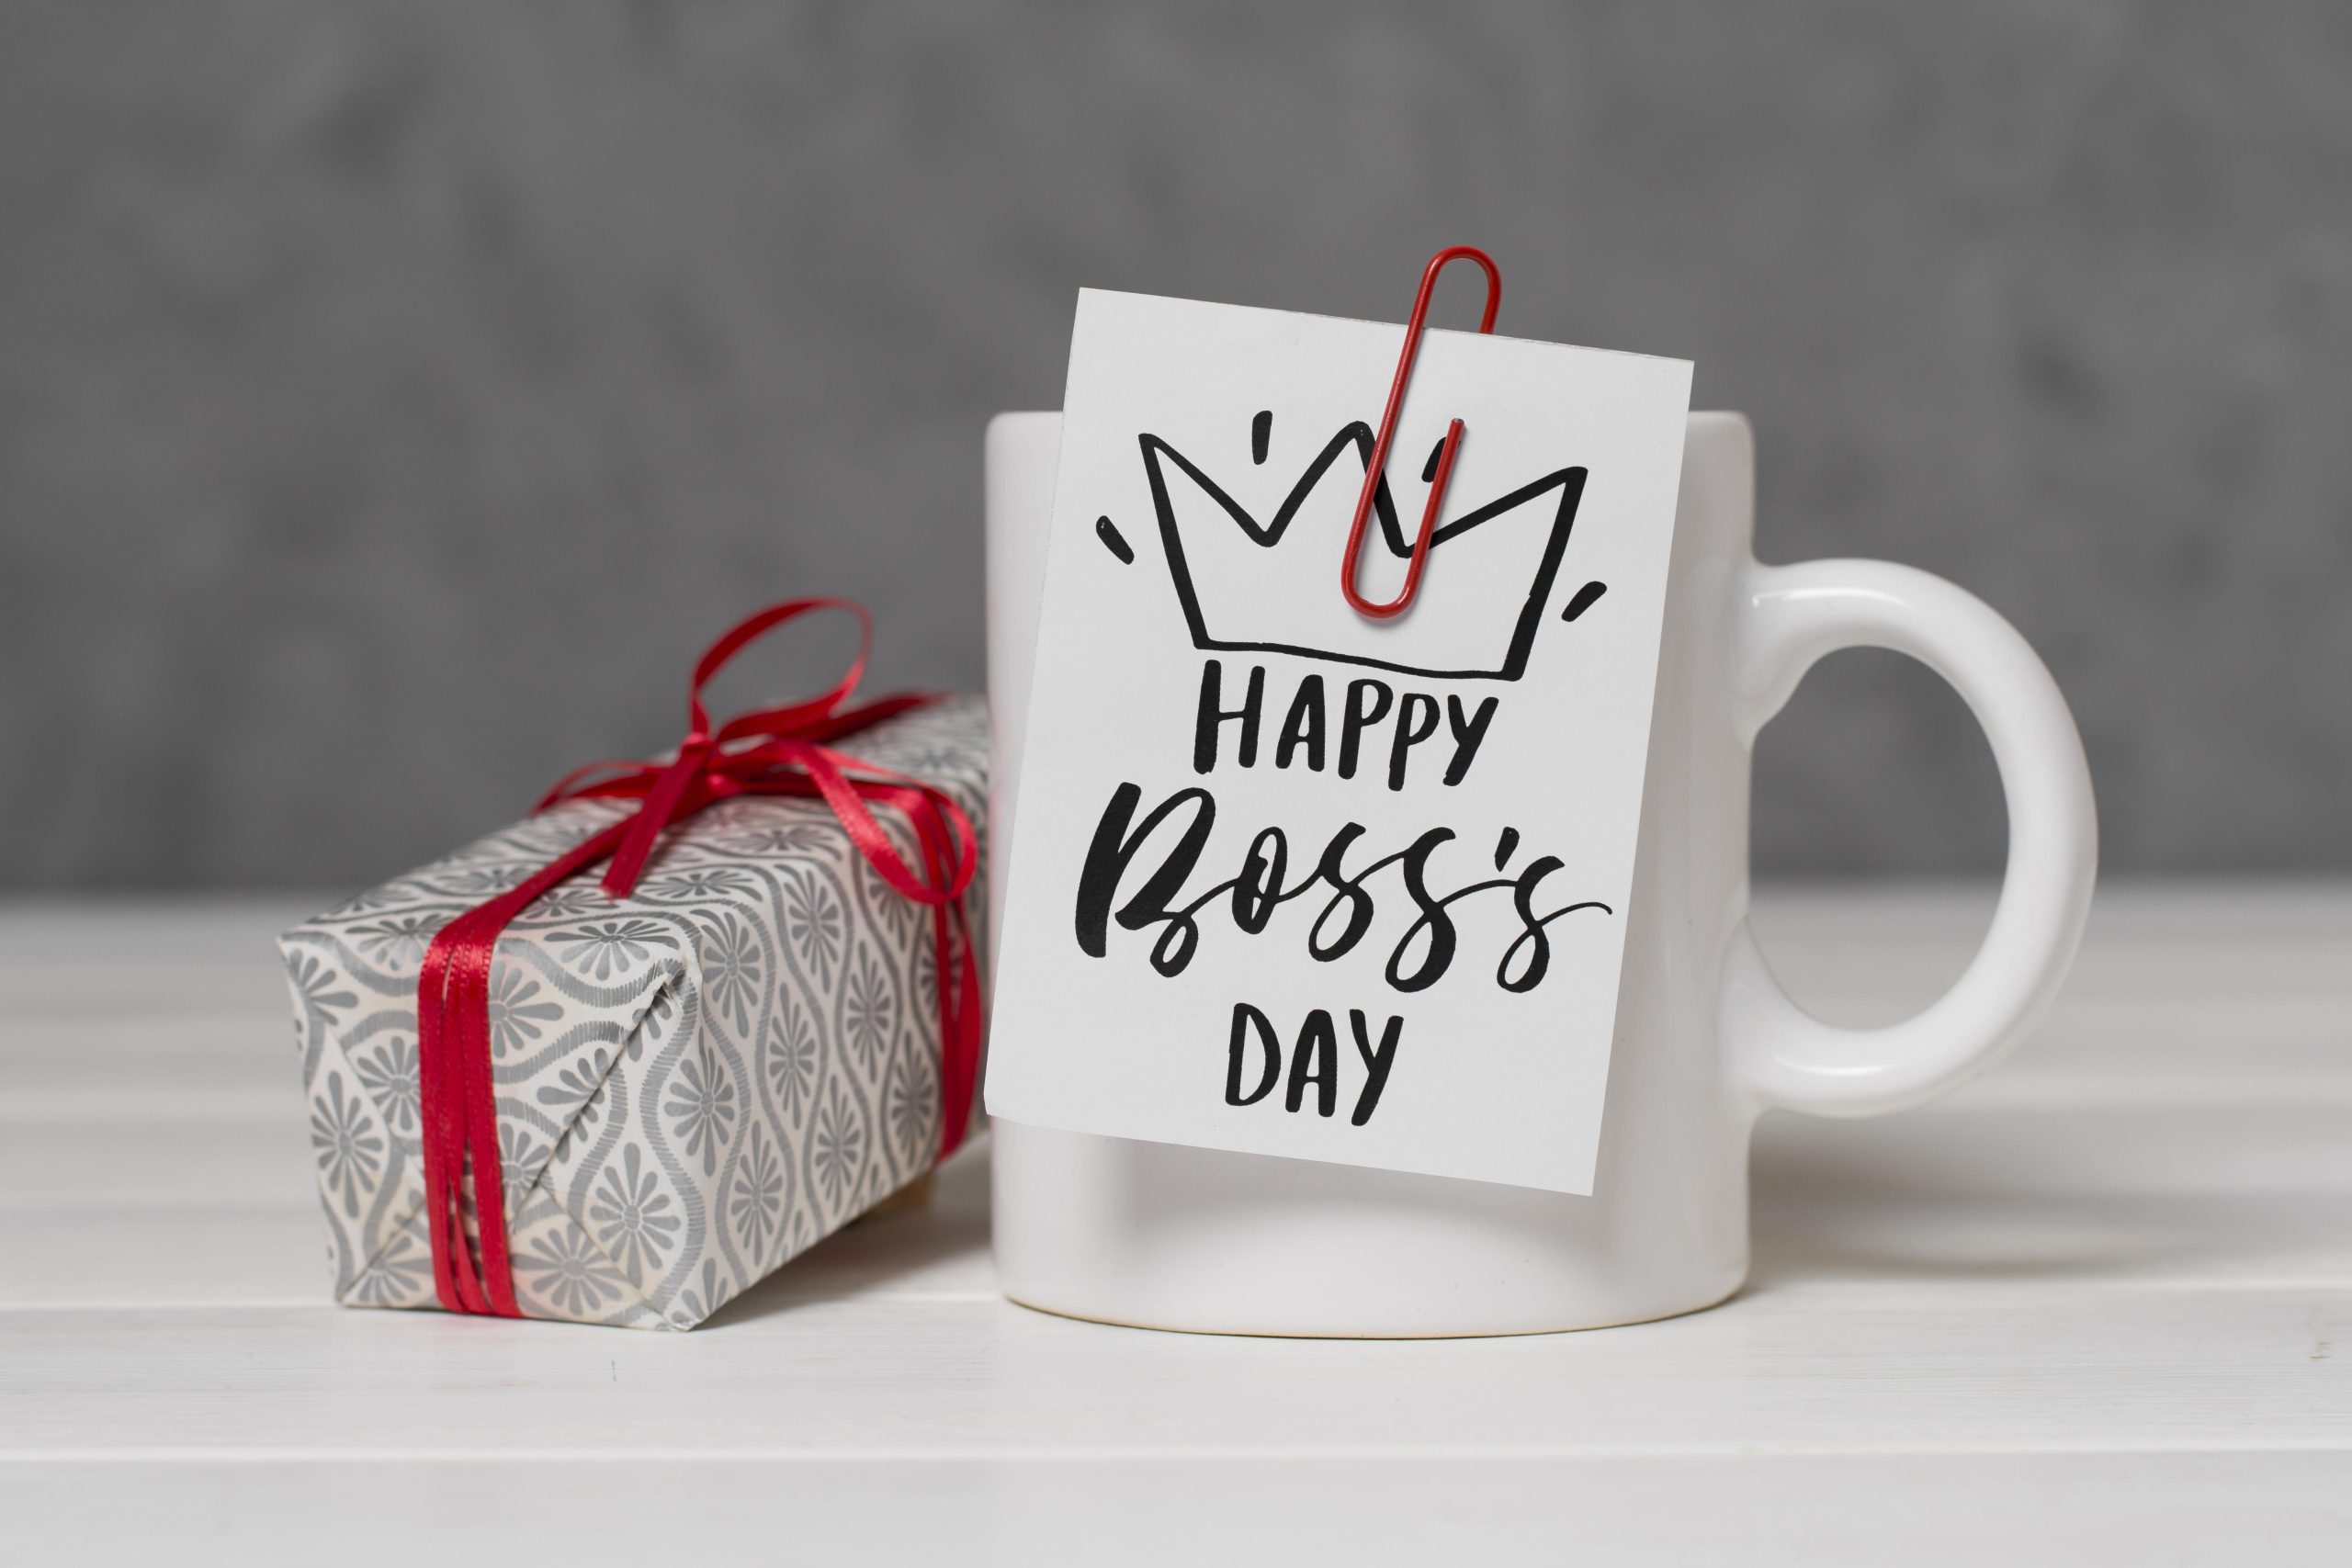 Boss-s-day-arrangement-with-present-cup